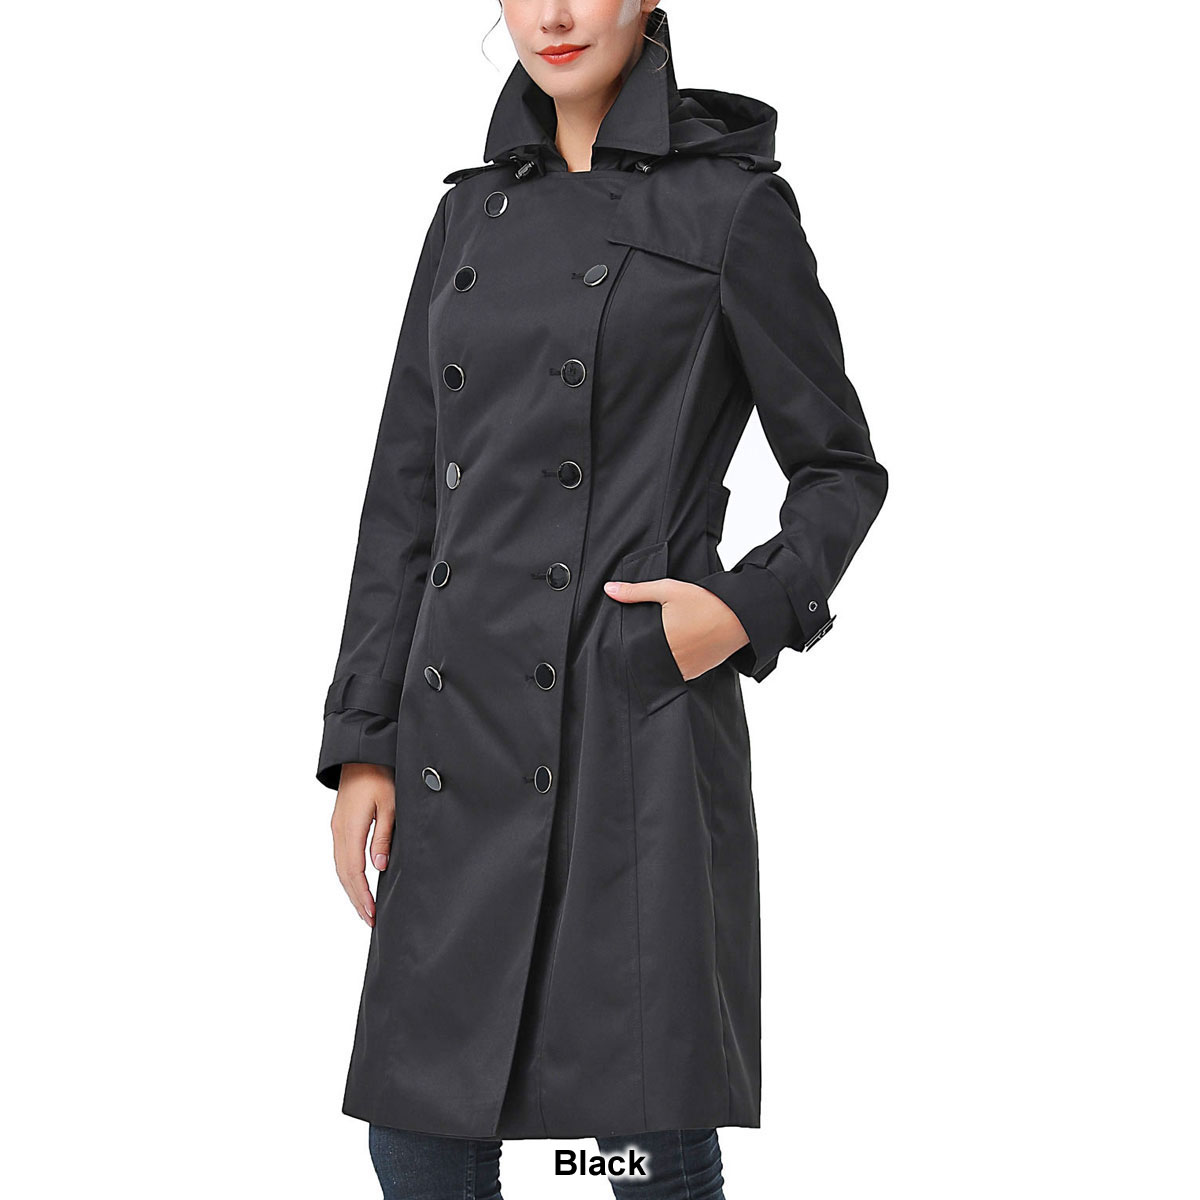 Womens BGSD Waterproof Double Breasted Trench Coat